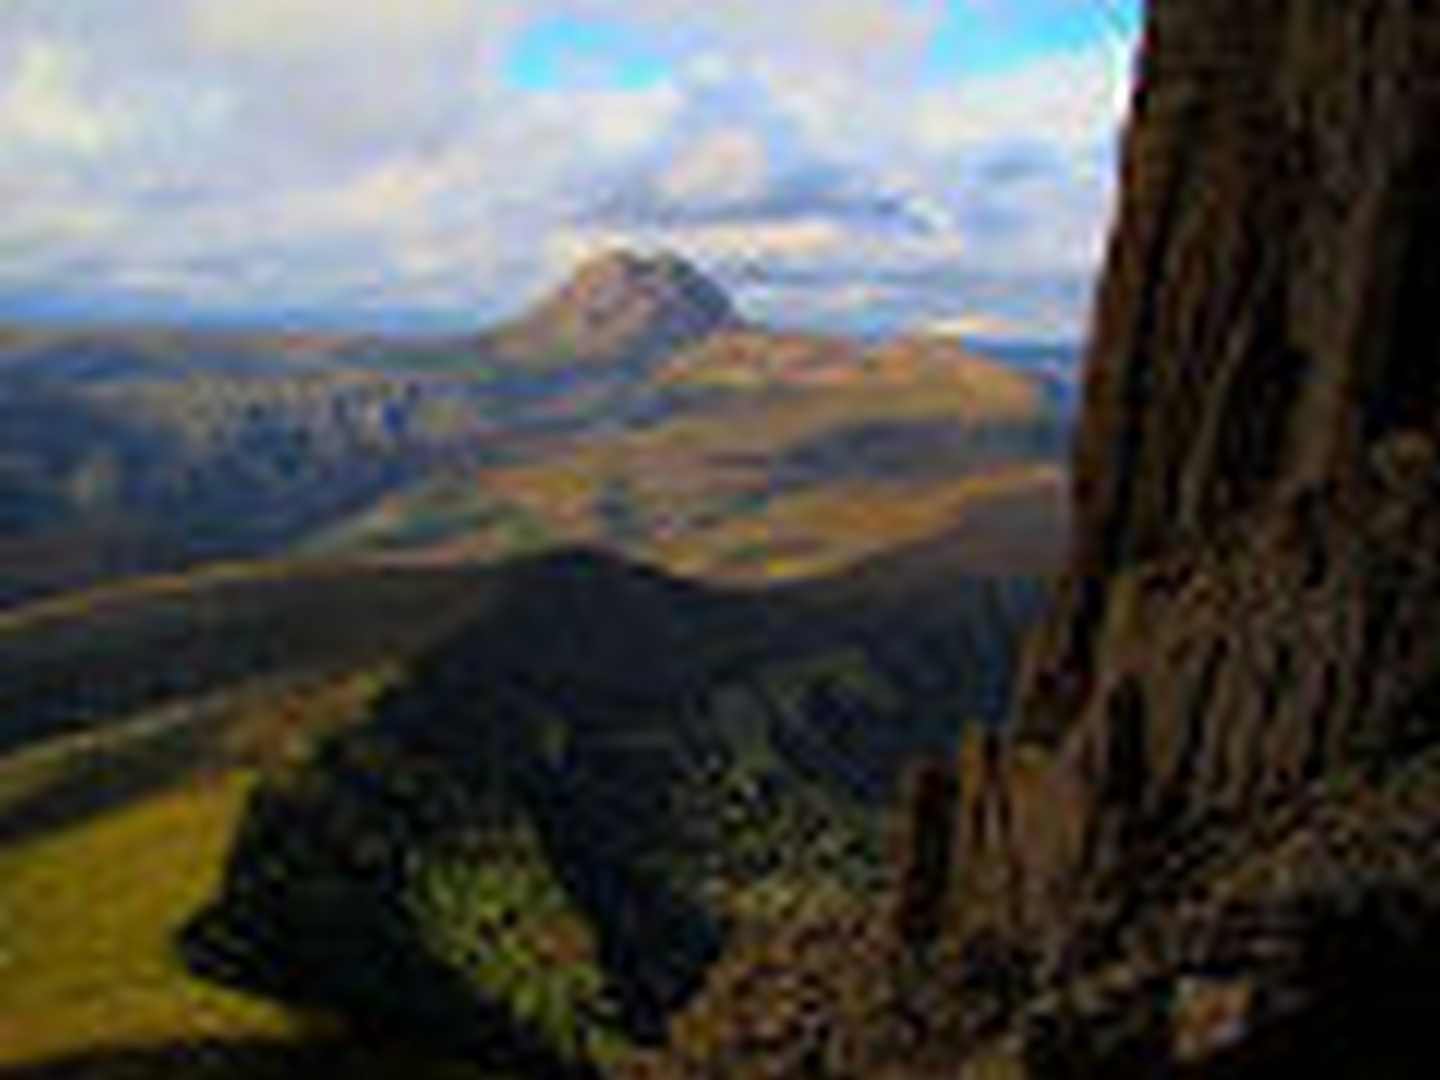 250px_cradle_mountain_seen_from_barn_bluff.jpg - 47.75 kB